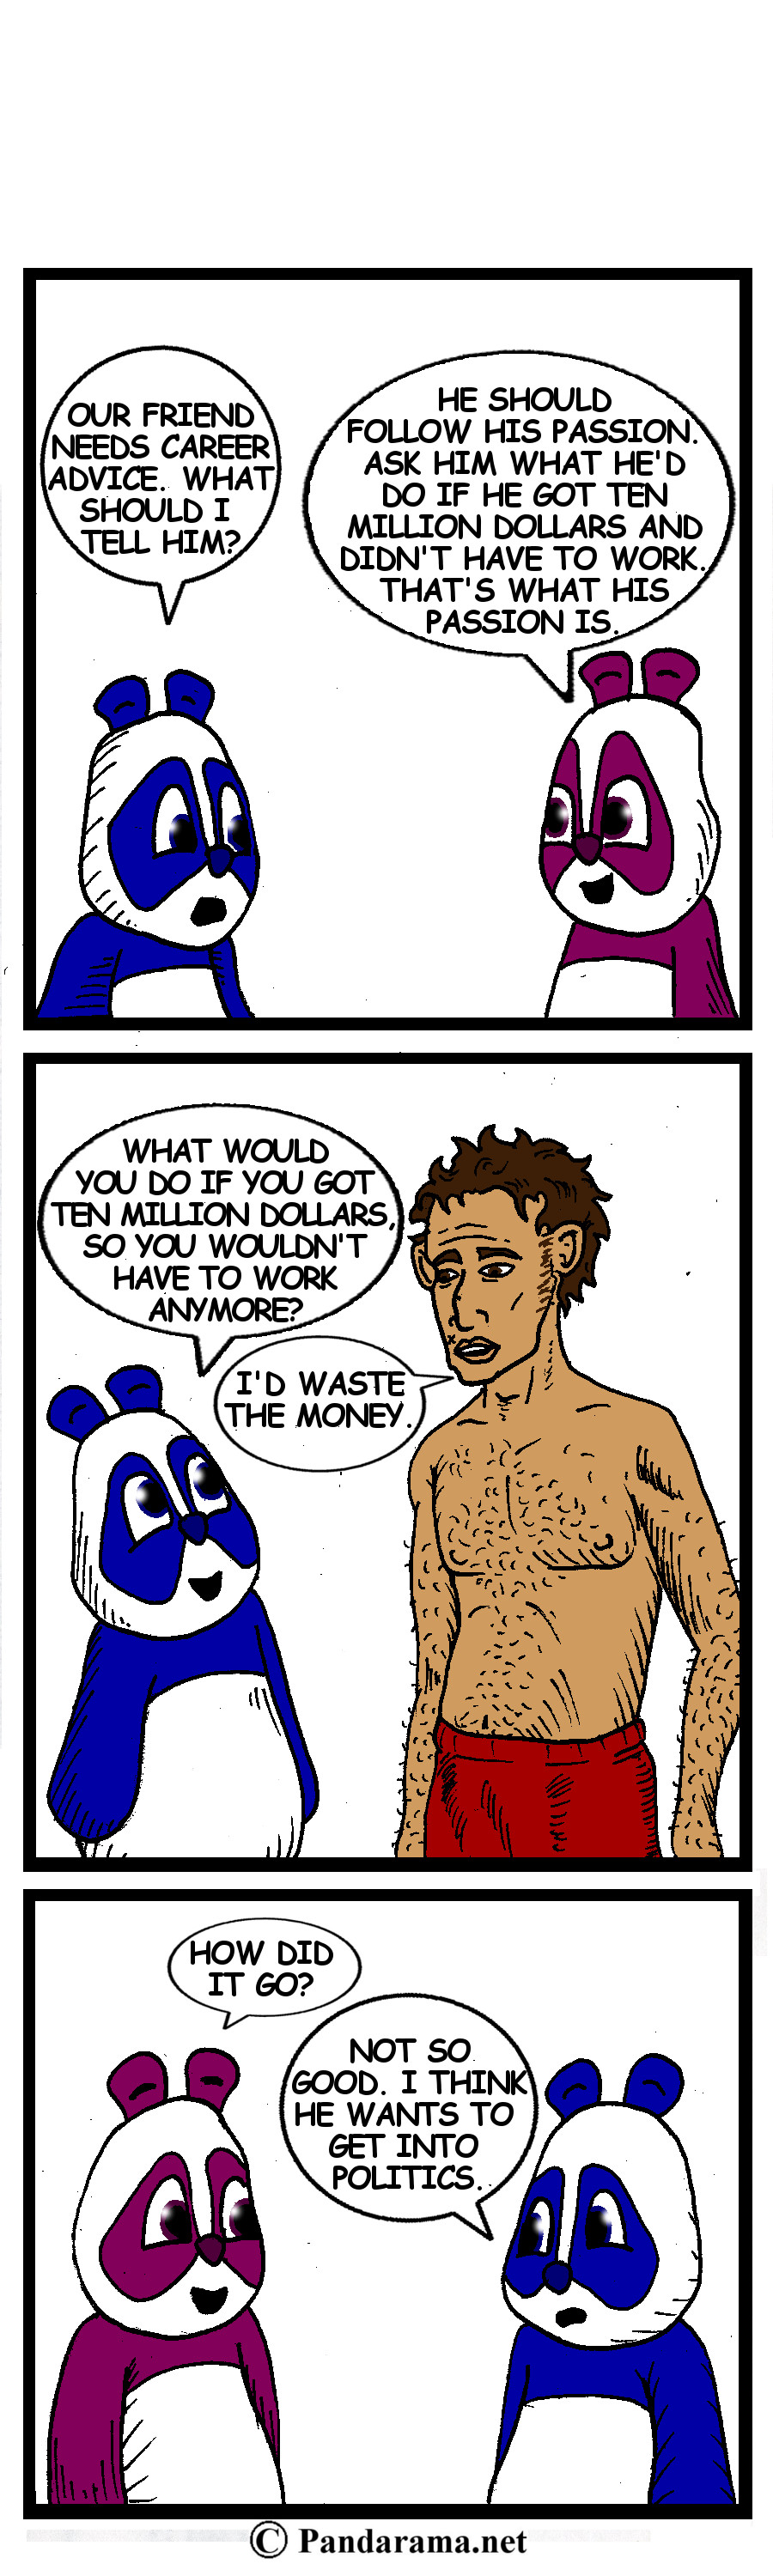 career advise: what would you do with a million dollars, i'd waste it, you should be a politician. pandarama, comicstrip